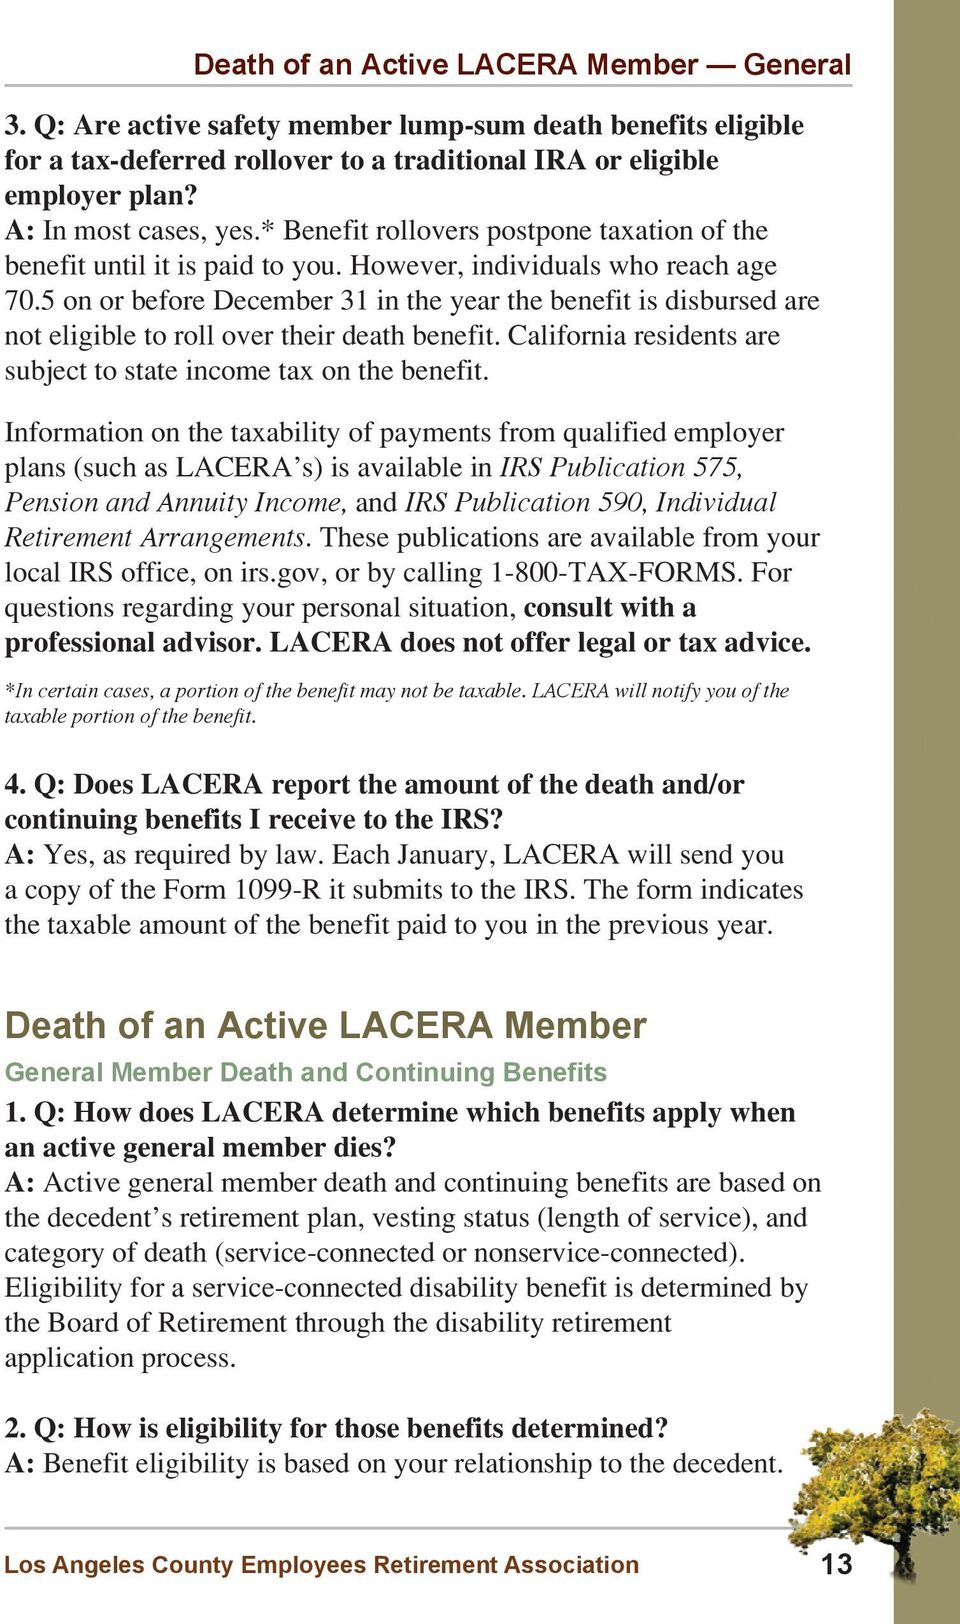 5 on or before December 31 in the year the benefit is disbursed are not eligible to roll over their death benefit. California residents are subject to state income tax on the benefit.